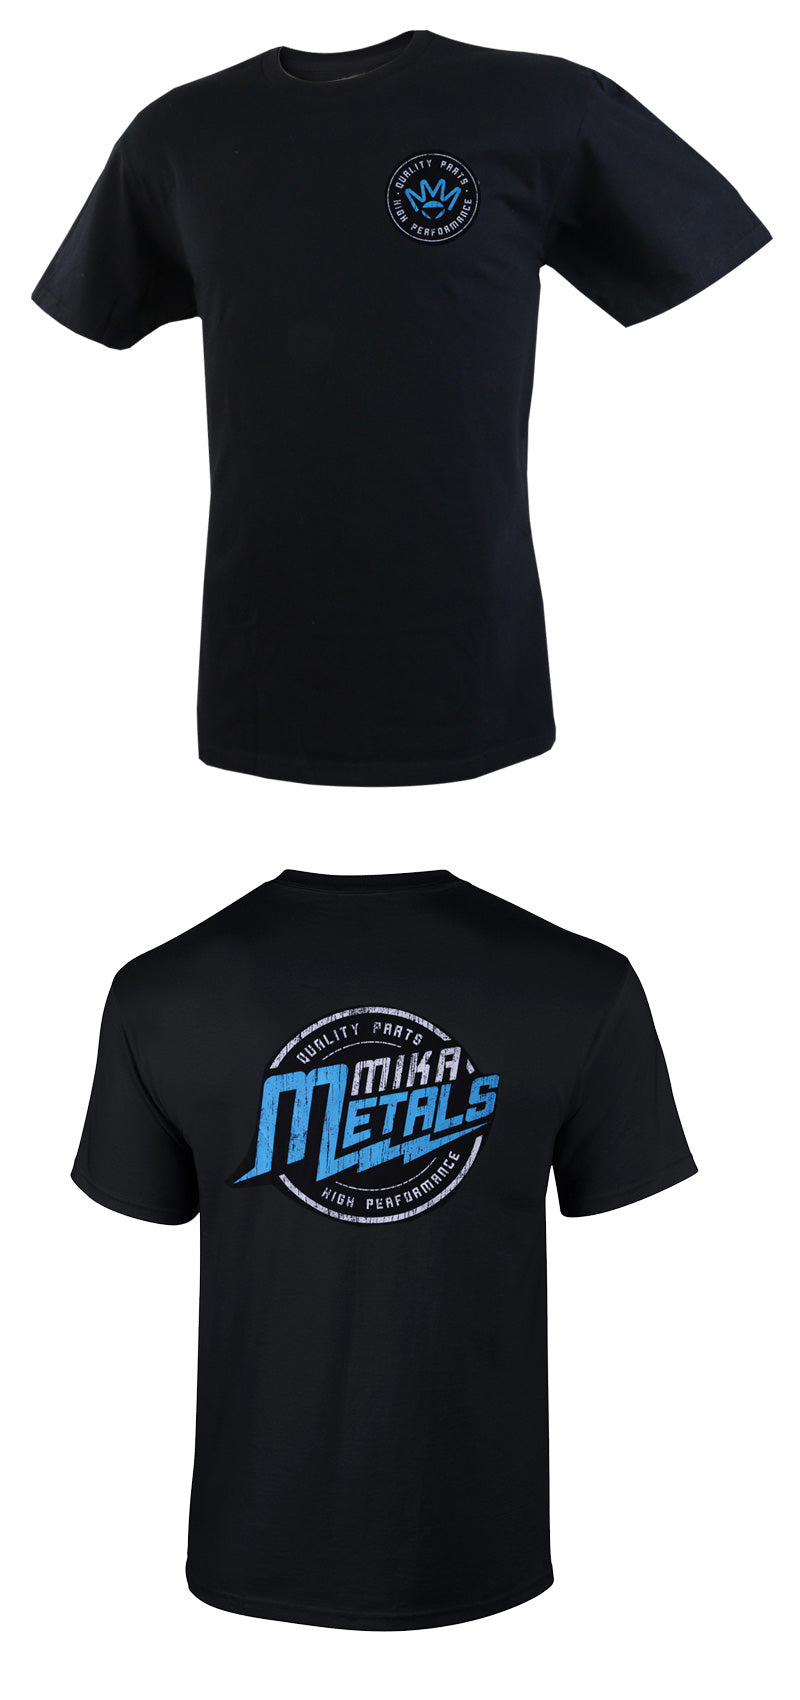 MIKA METALS Quality Parts T shirt "Only the Best"